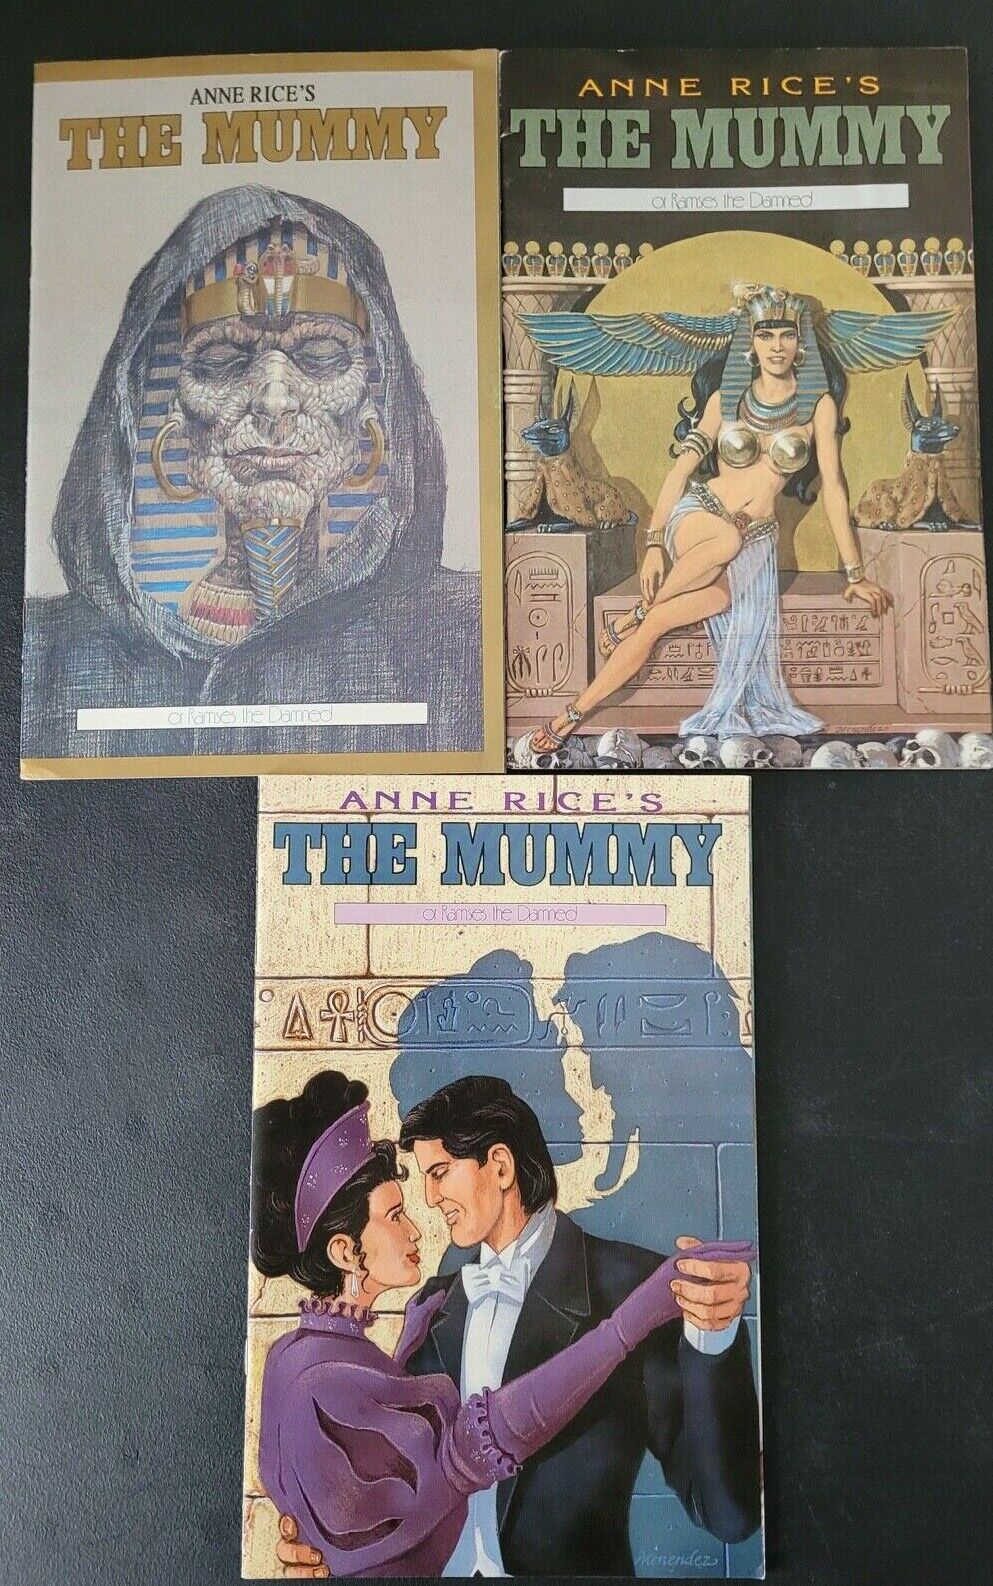 ANNE RICE'S THE MUMMY: RAMSES THE DAMNED SET OF 3 ISSUES 1990 MILLENNIUM COMICS